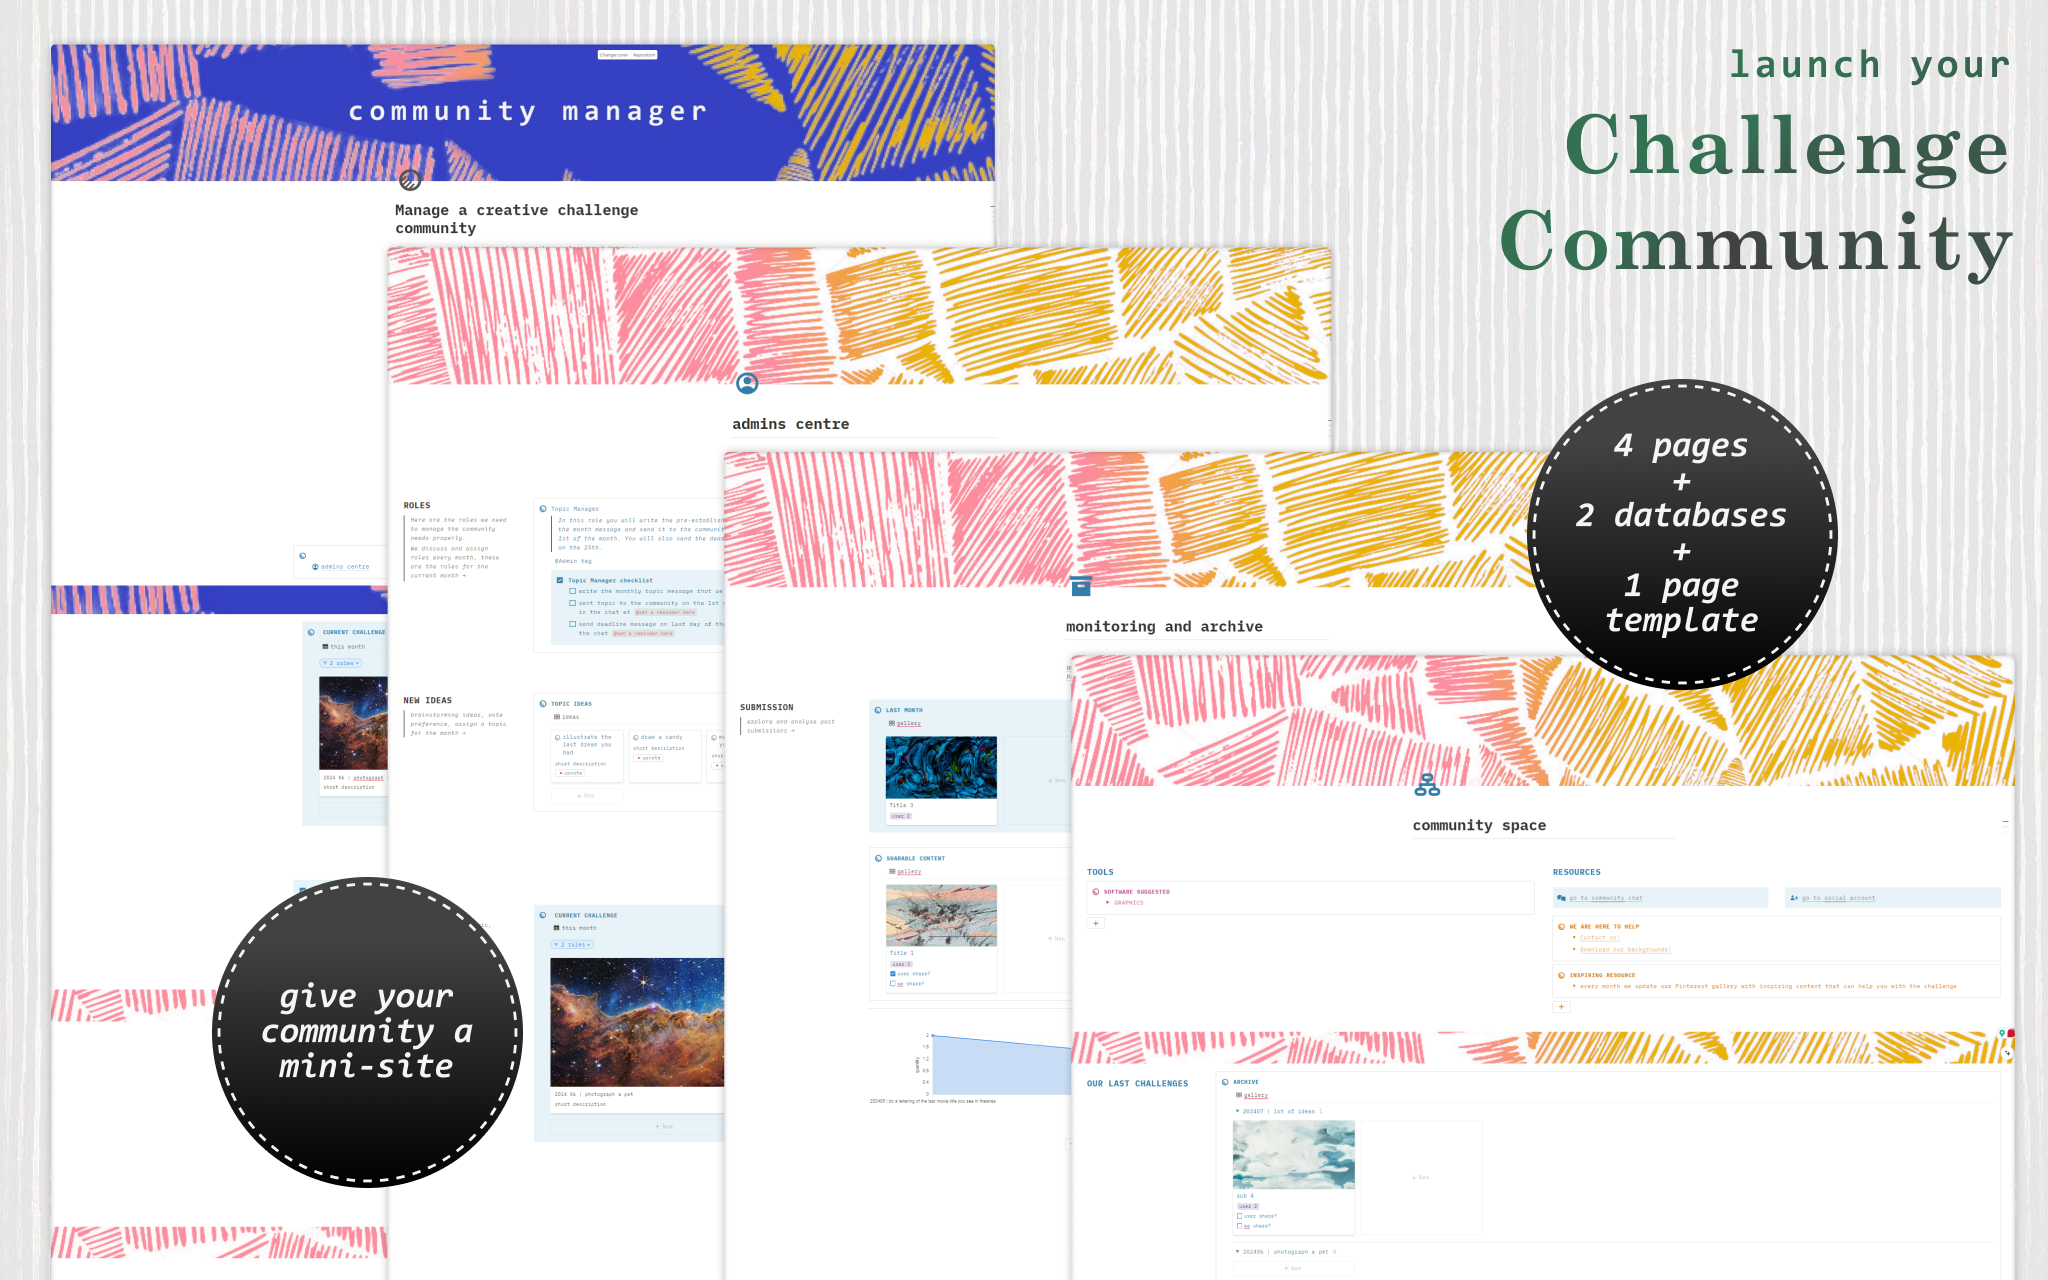 Manage, archive and store tools and resources for a community that enjoys a monthly (or other period) challenge with this Notion template dashboard with 2 databases,4 pages and a mini-site. 
A Notion Creator Month original template.